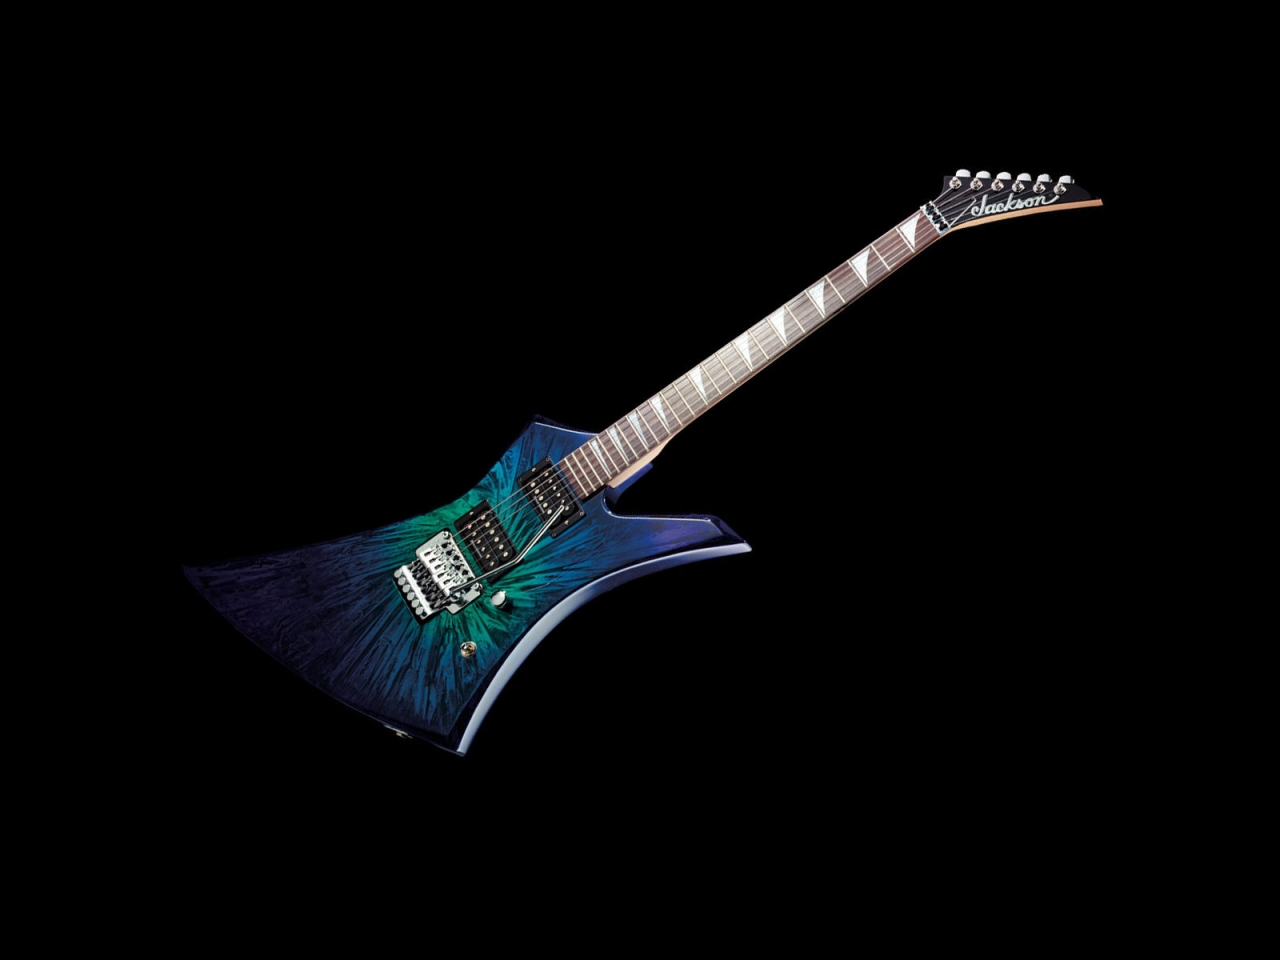 Colourful Guitar for 1280 x 960 resolution